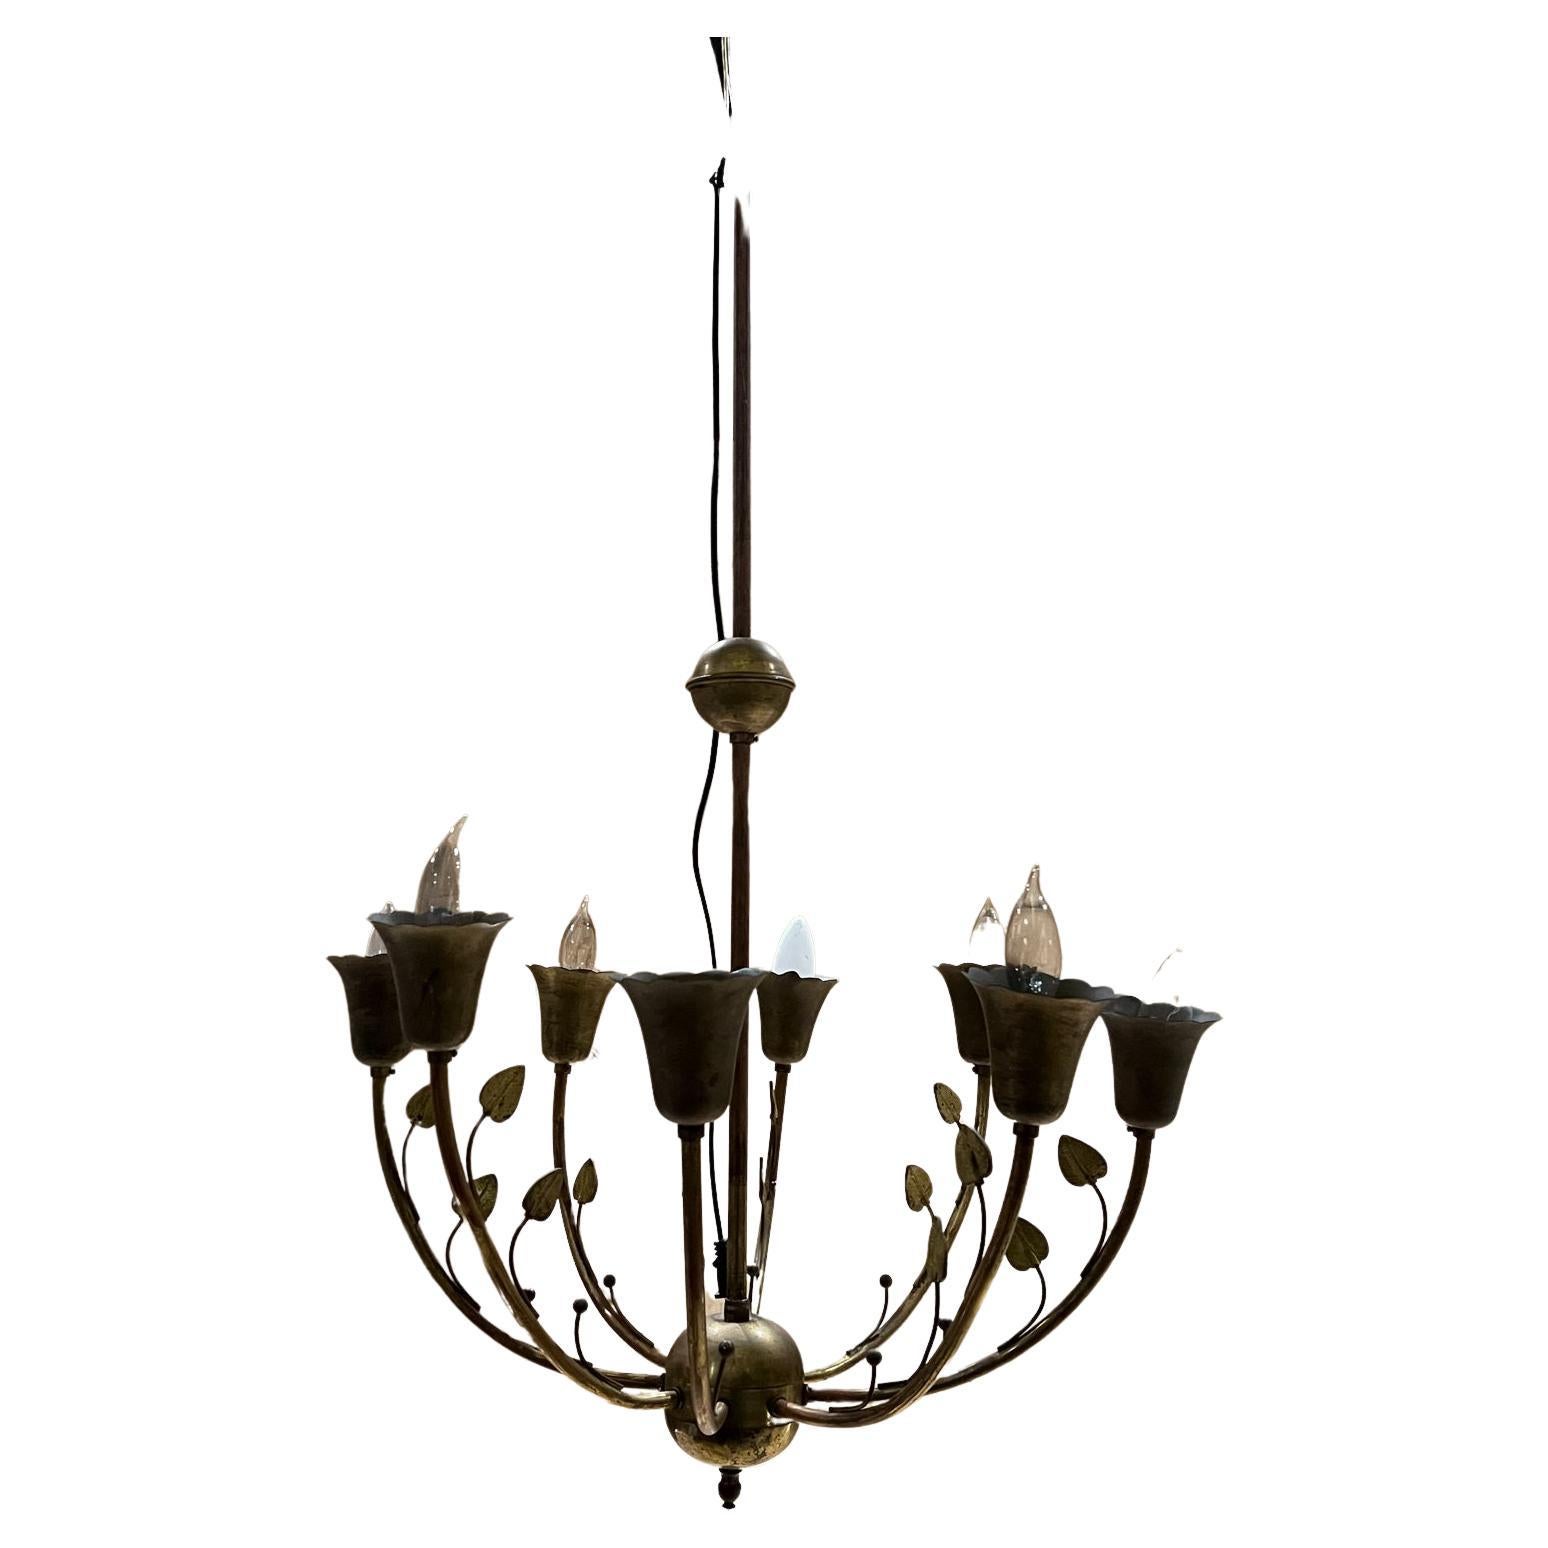 1950s Patinated Old Italian Brass Chandelier Eight Arm Lamp Style of Stilnovo